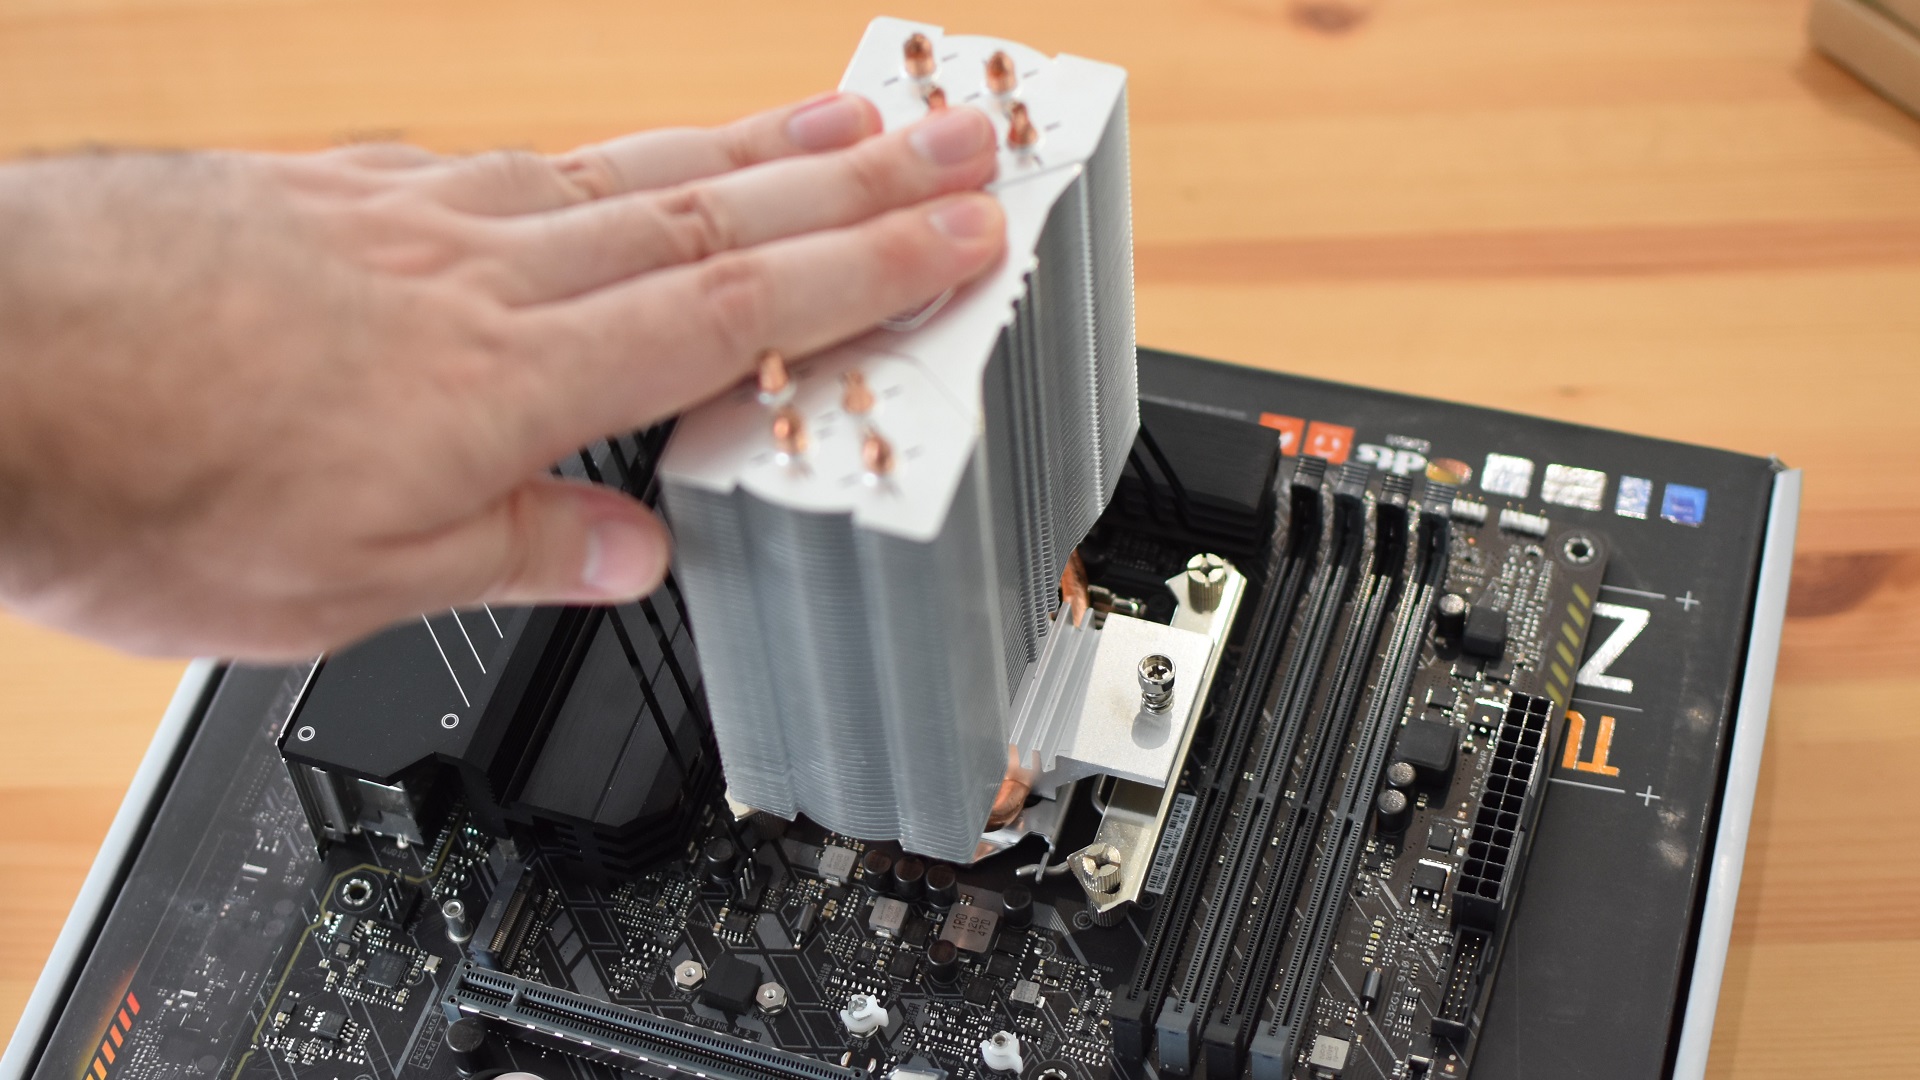 Step 4b of how to install a CPU air cooler: press the cooler down on the CPU and attach it securely to the mounting hardware.